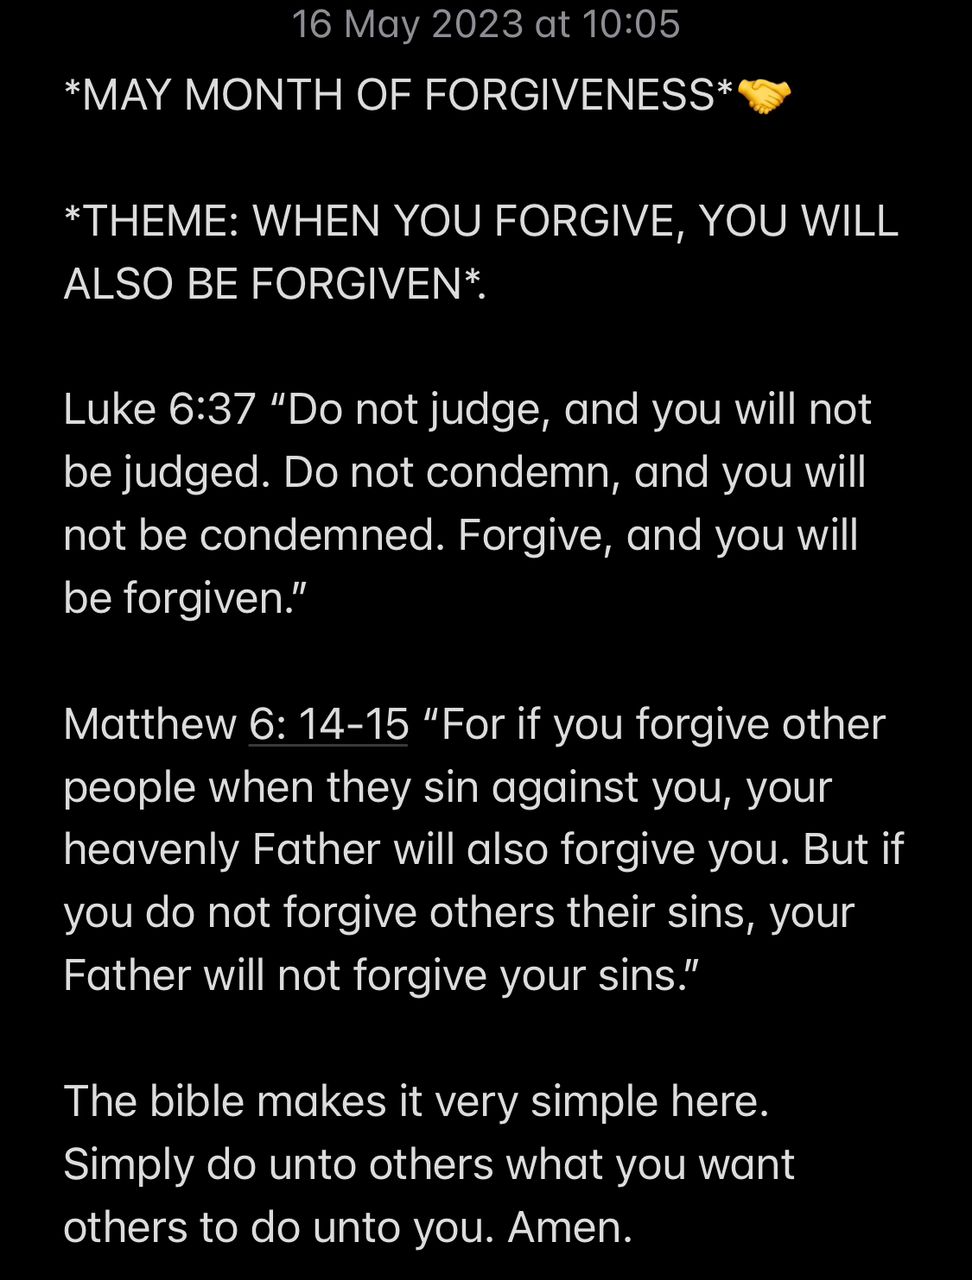 FORGIVE AND BE FORGIVEN